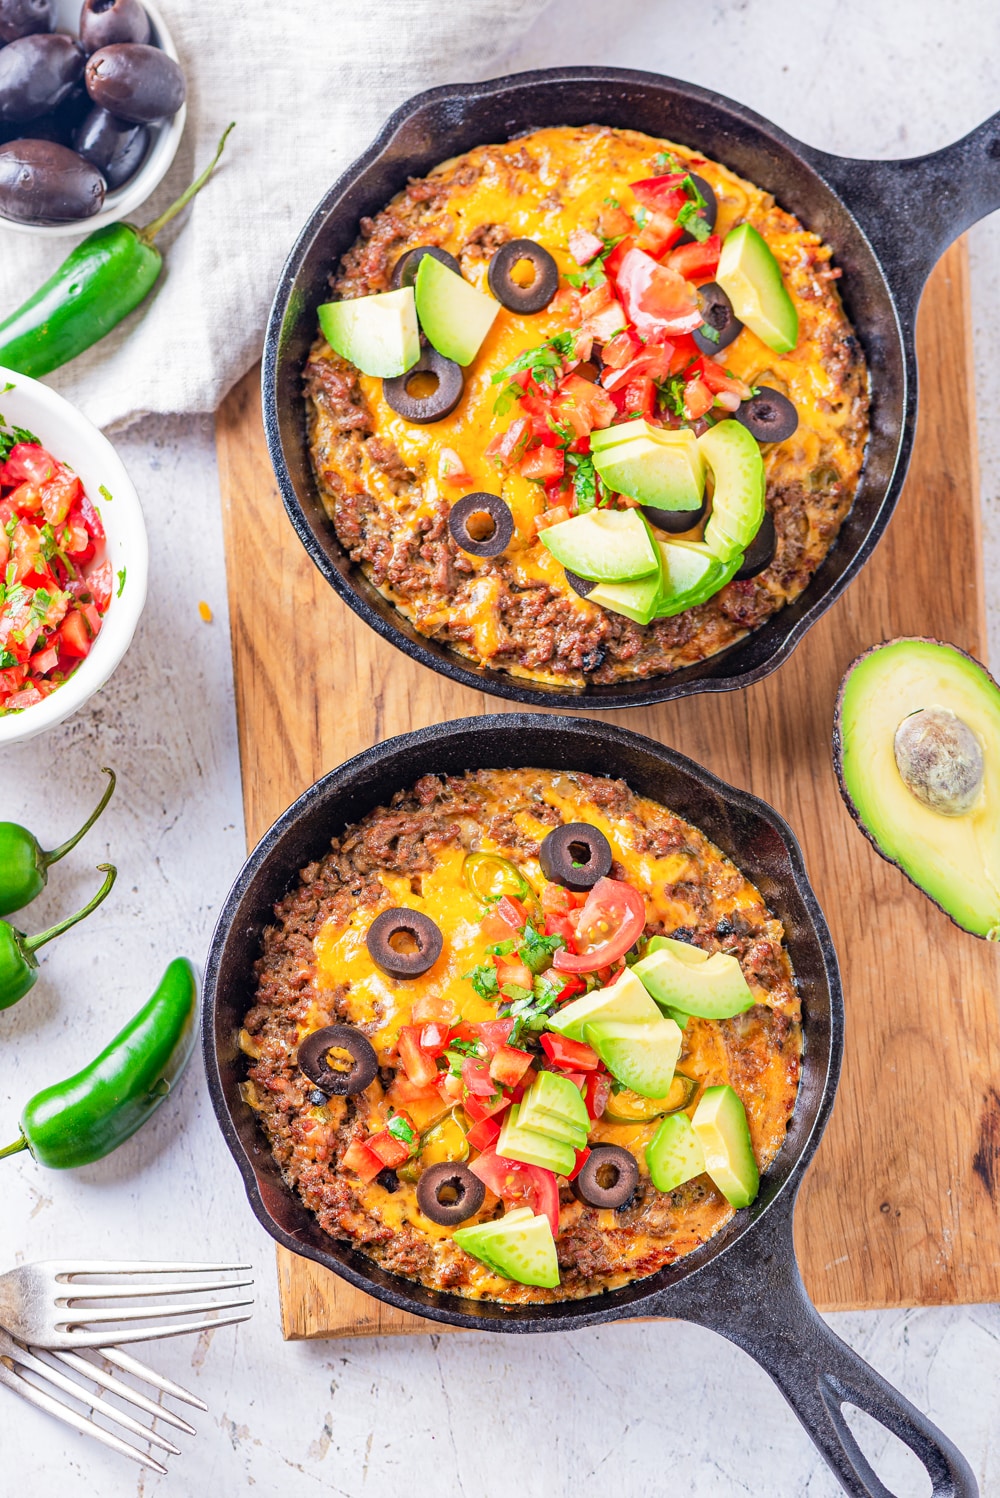 2 Cast iron skillets filled with ground beef, cheese, salsa, and pieces of avocado.